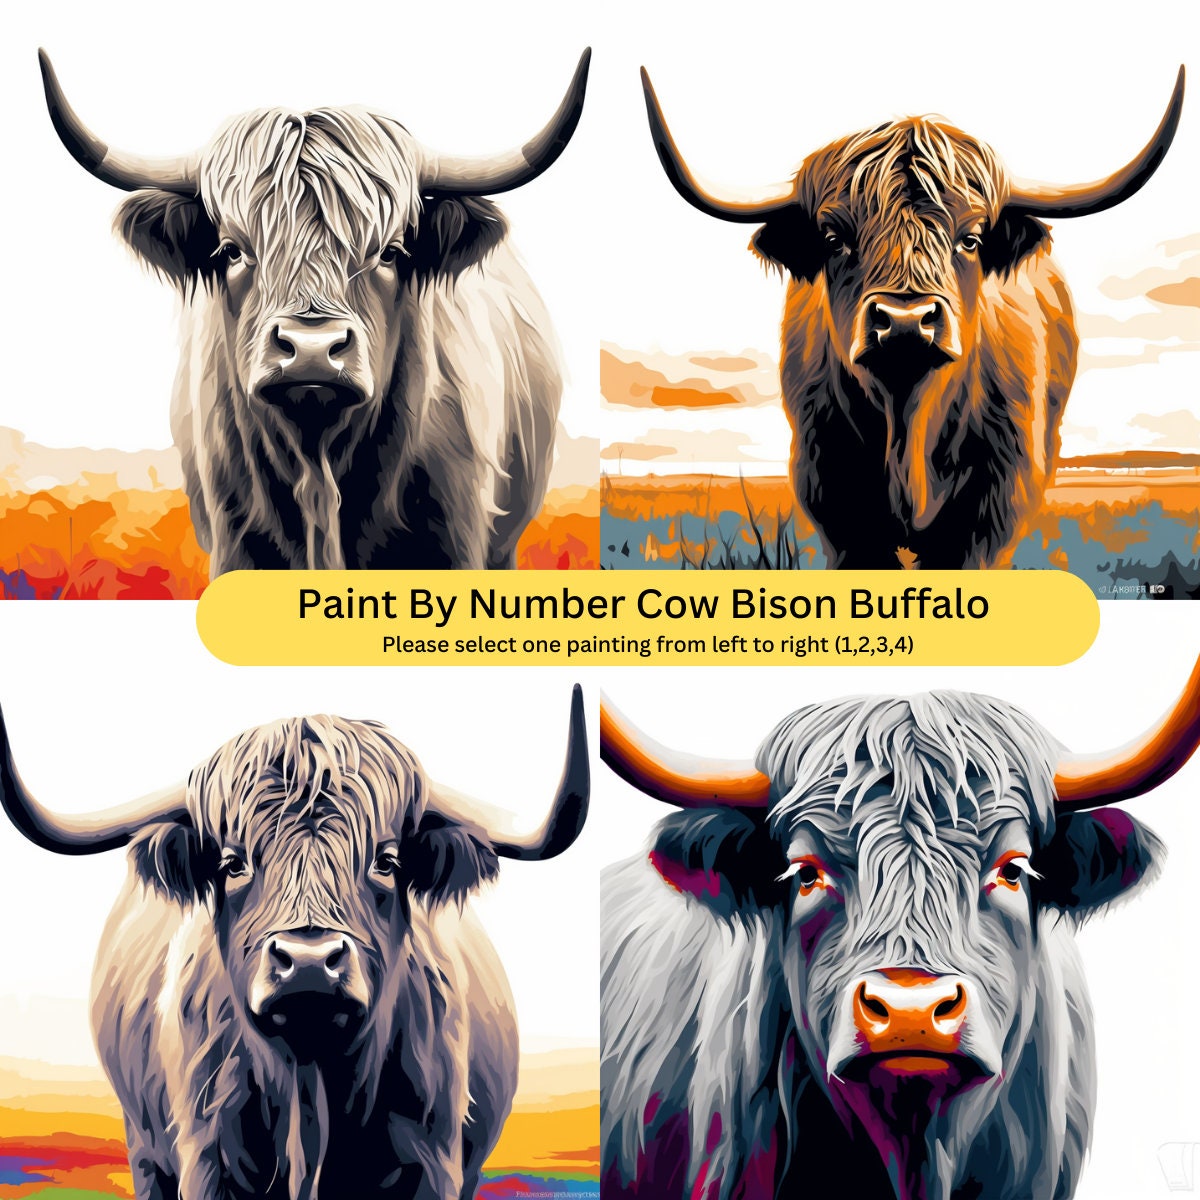 Cow Portrait - Paint by Numbers Kit for Adults DIY Oil Painting